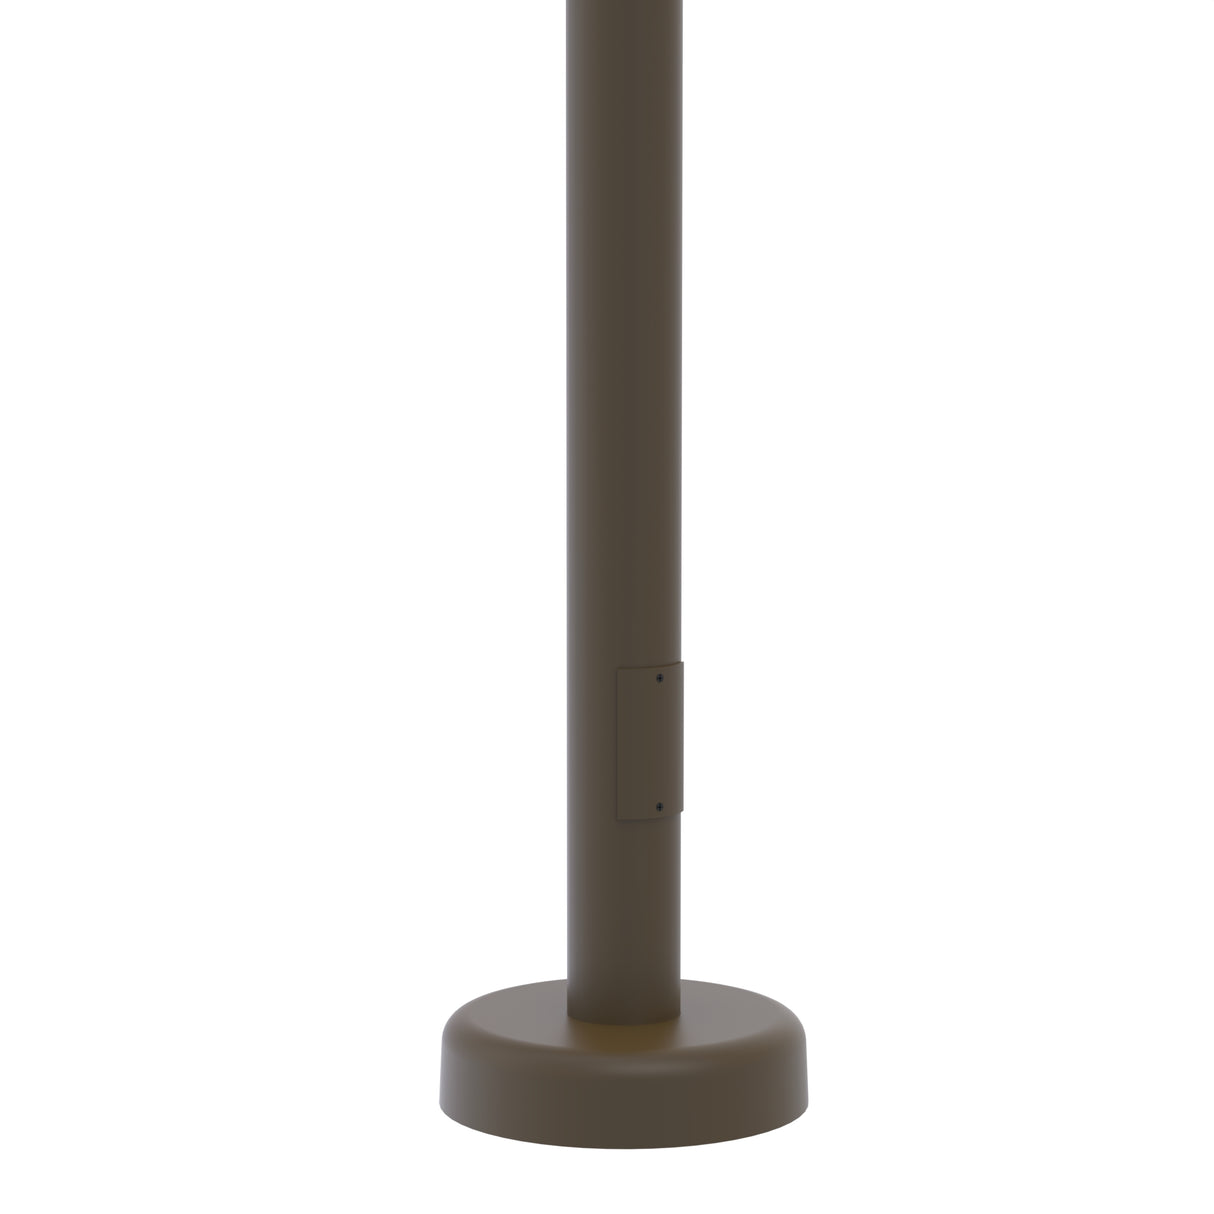 20' Tall x 6.0" OD x 0.188" Thick, Round Straight Aluminum, Hinged Anchor Base Light Pole